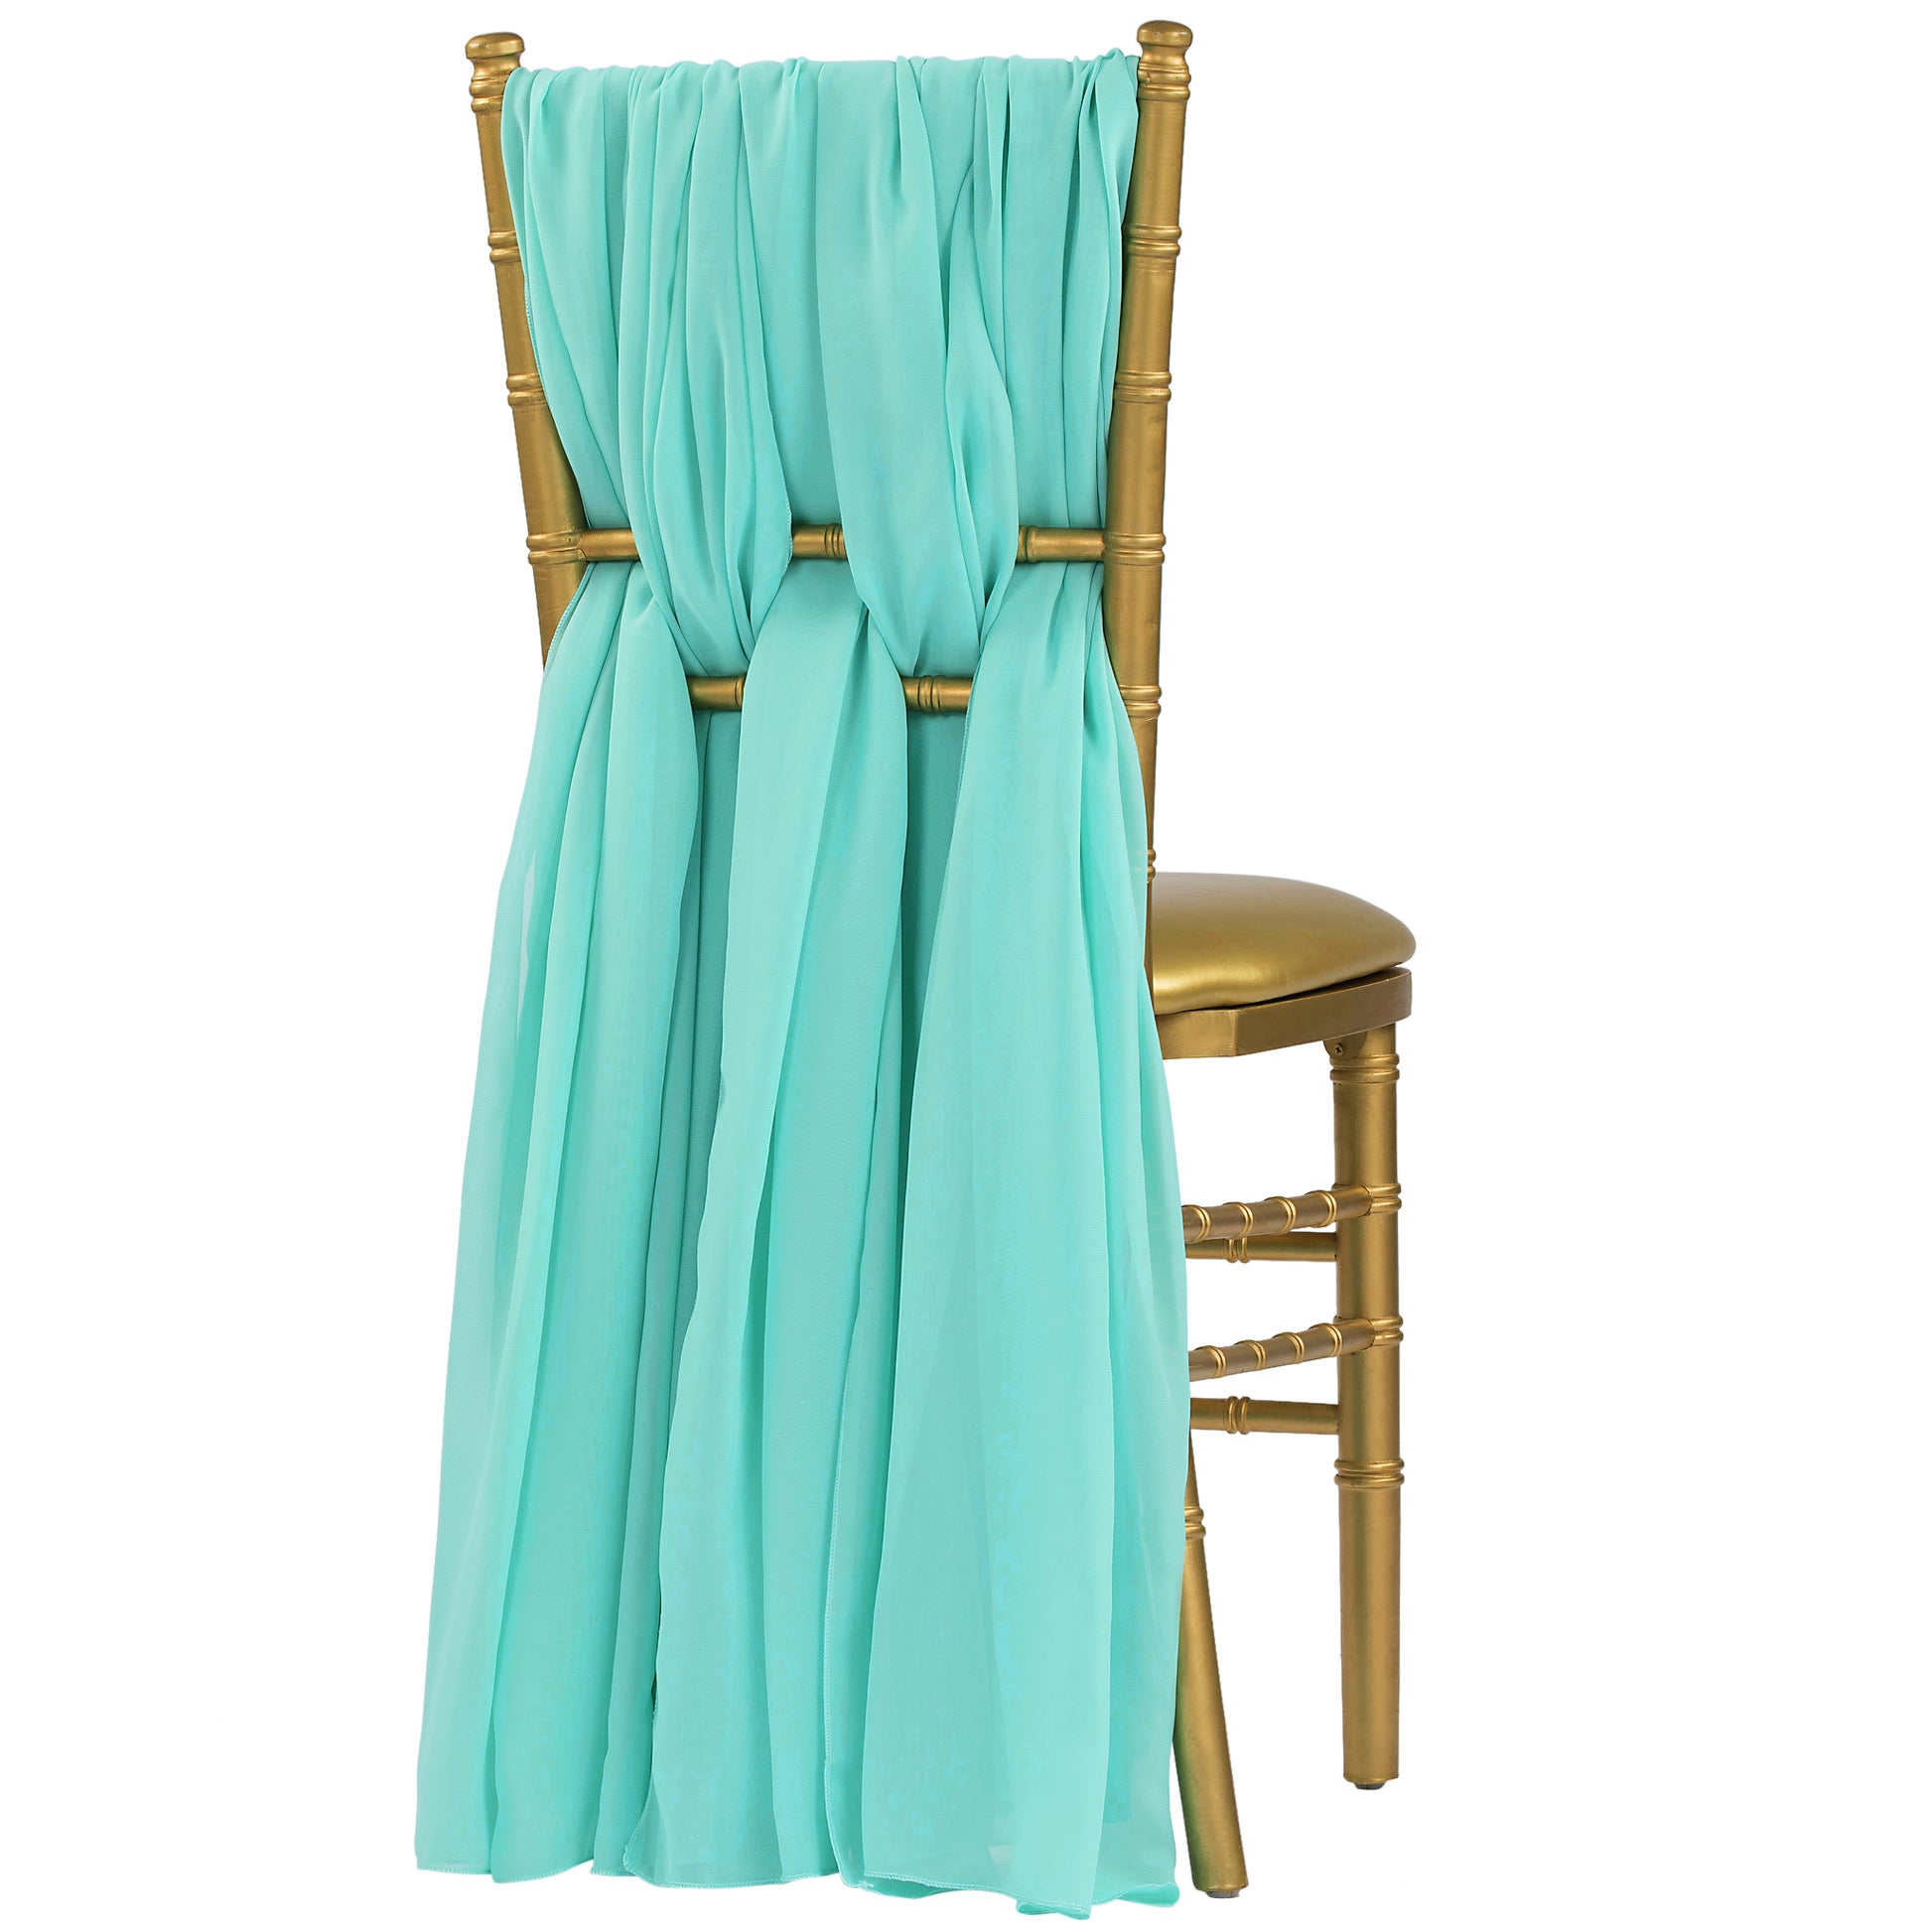 5pcs Pack of Chiffon Chair Sashes/Ties - Turquoise - CV Linens